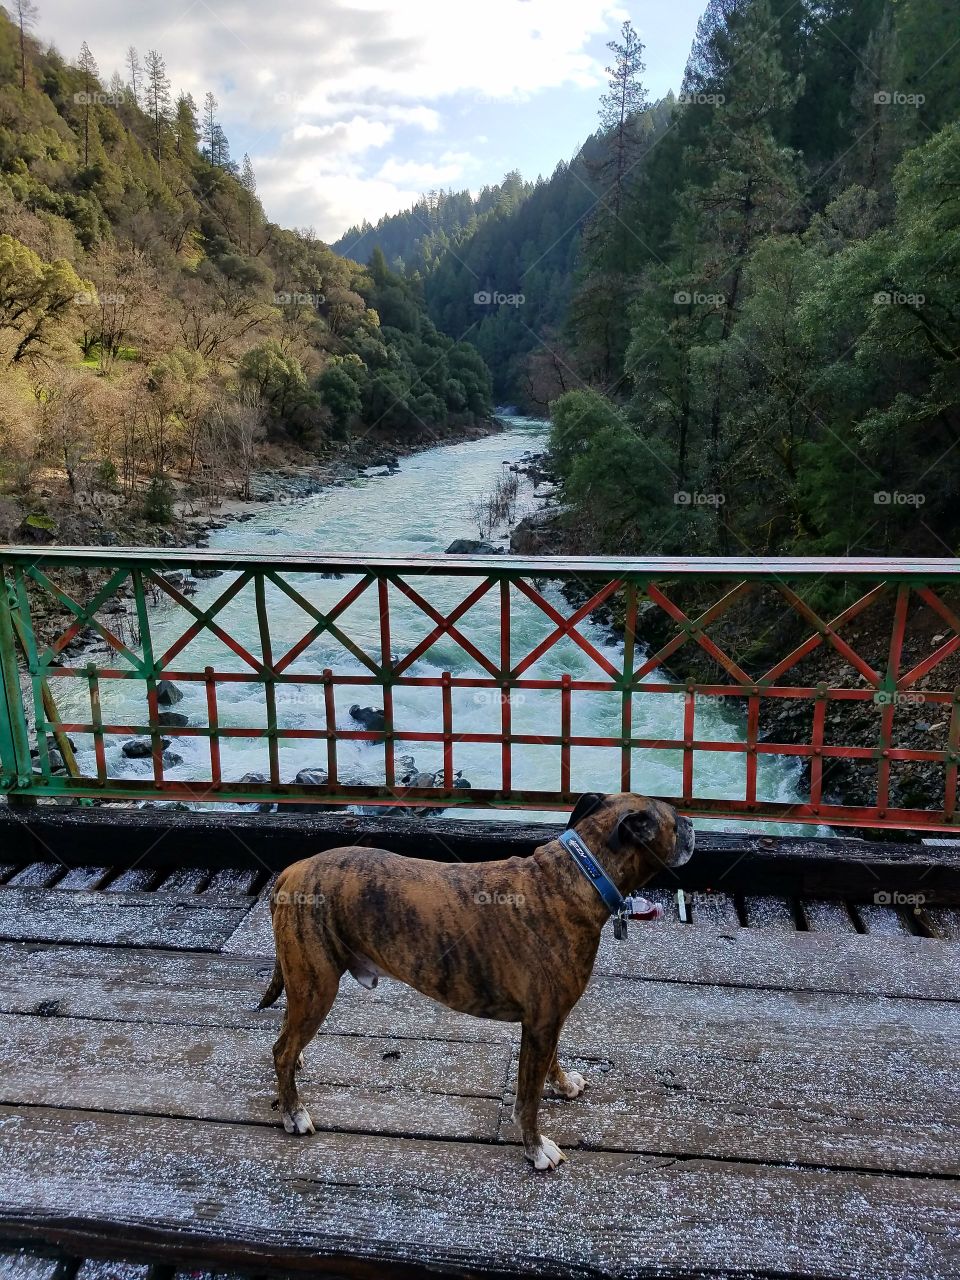 Thor checking out the Yuba River!